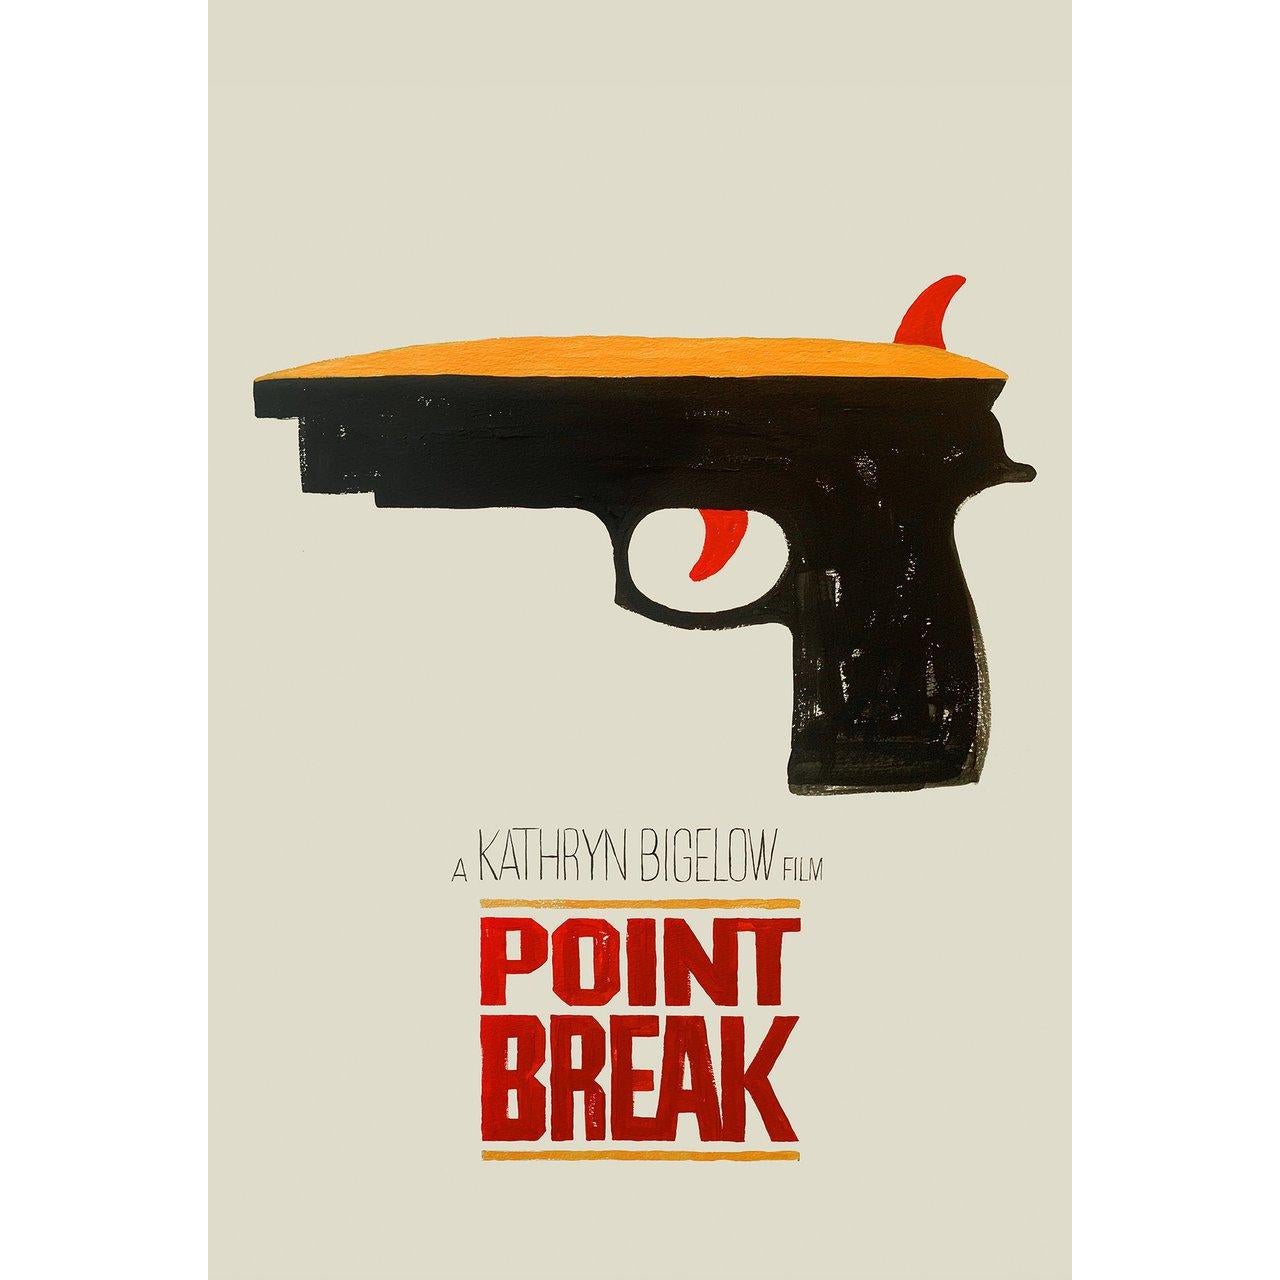 American Point Break 2022 U.S. Giclee Signed For Sale